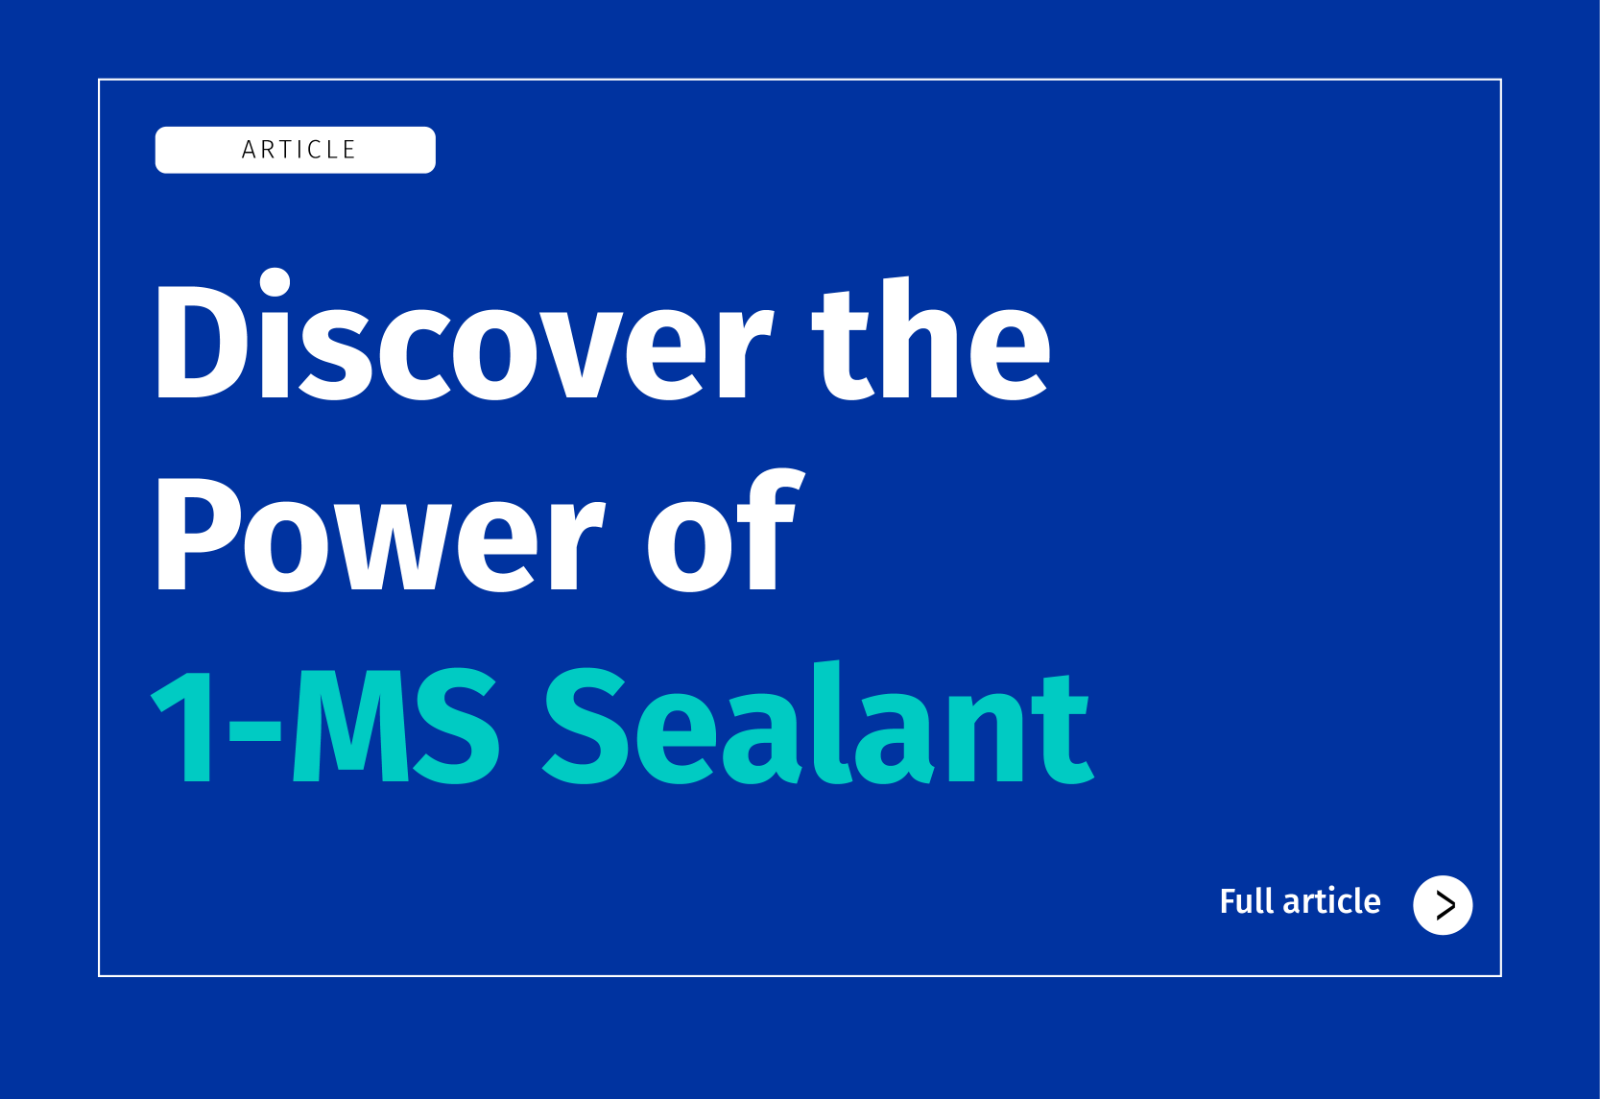 Discover the Power of 1-MS Sealant